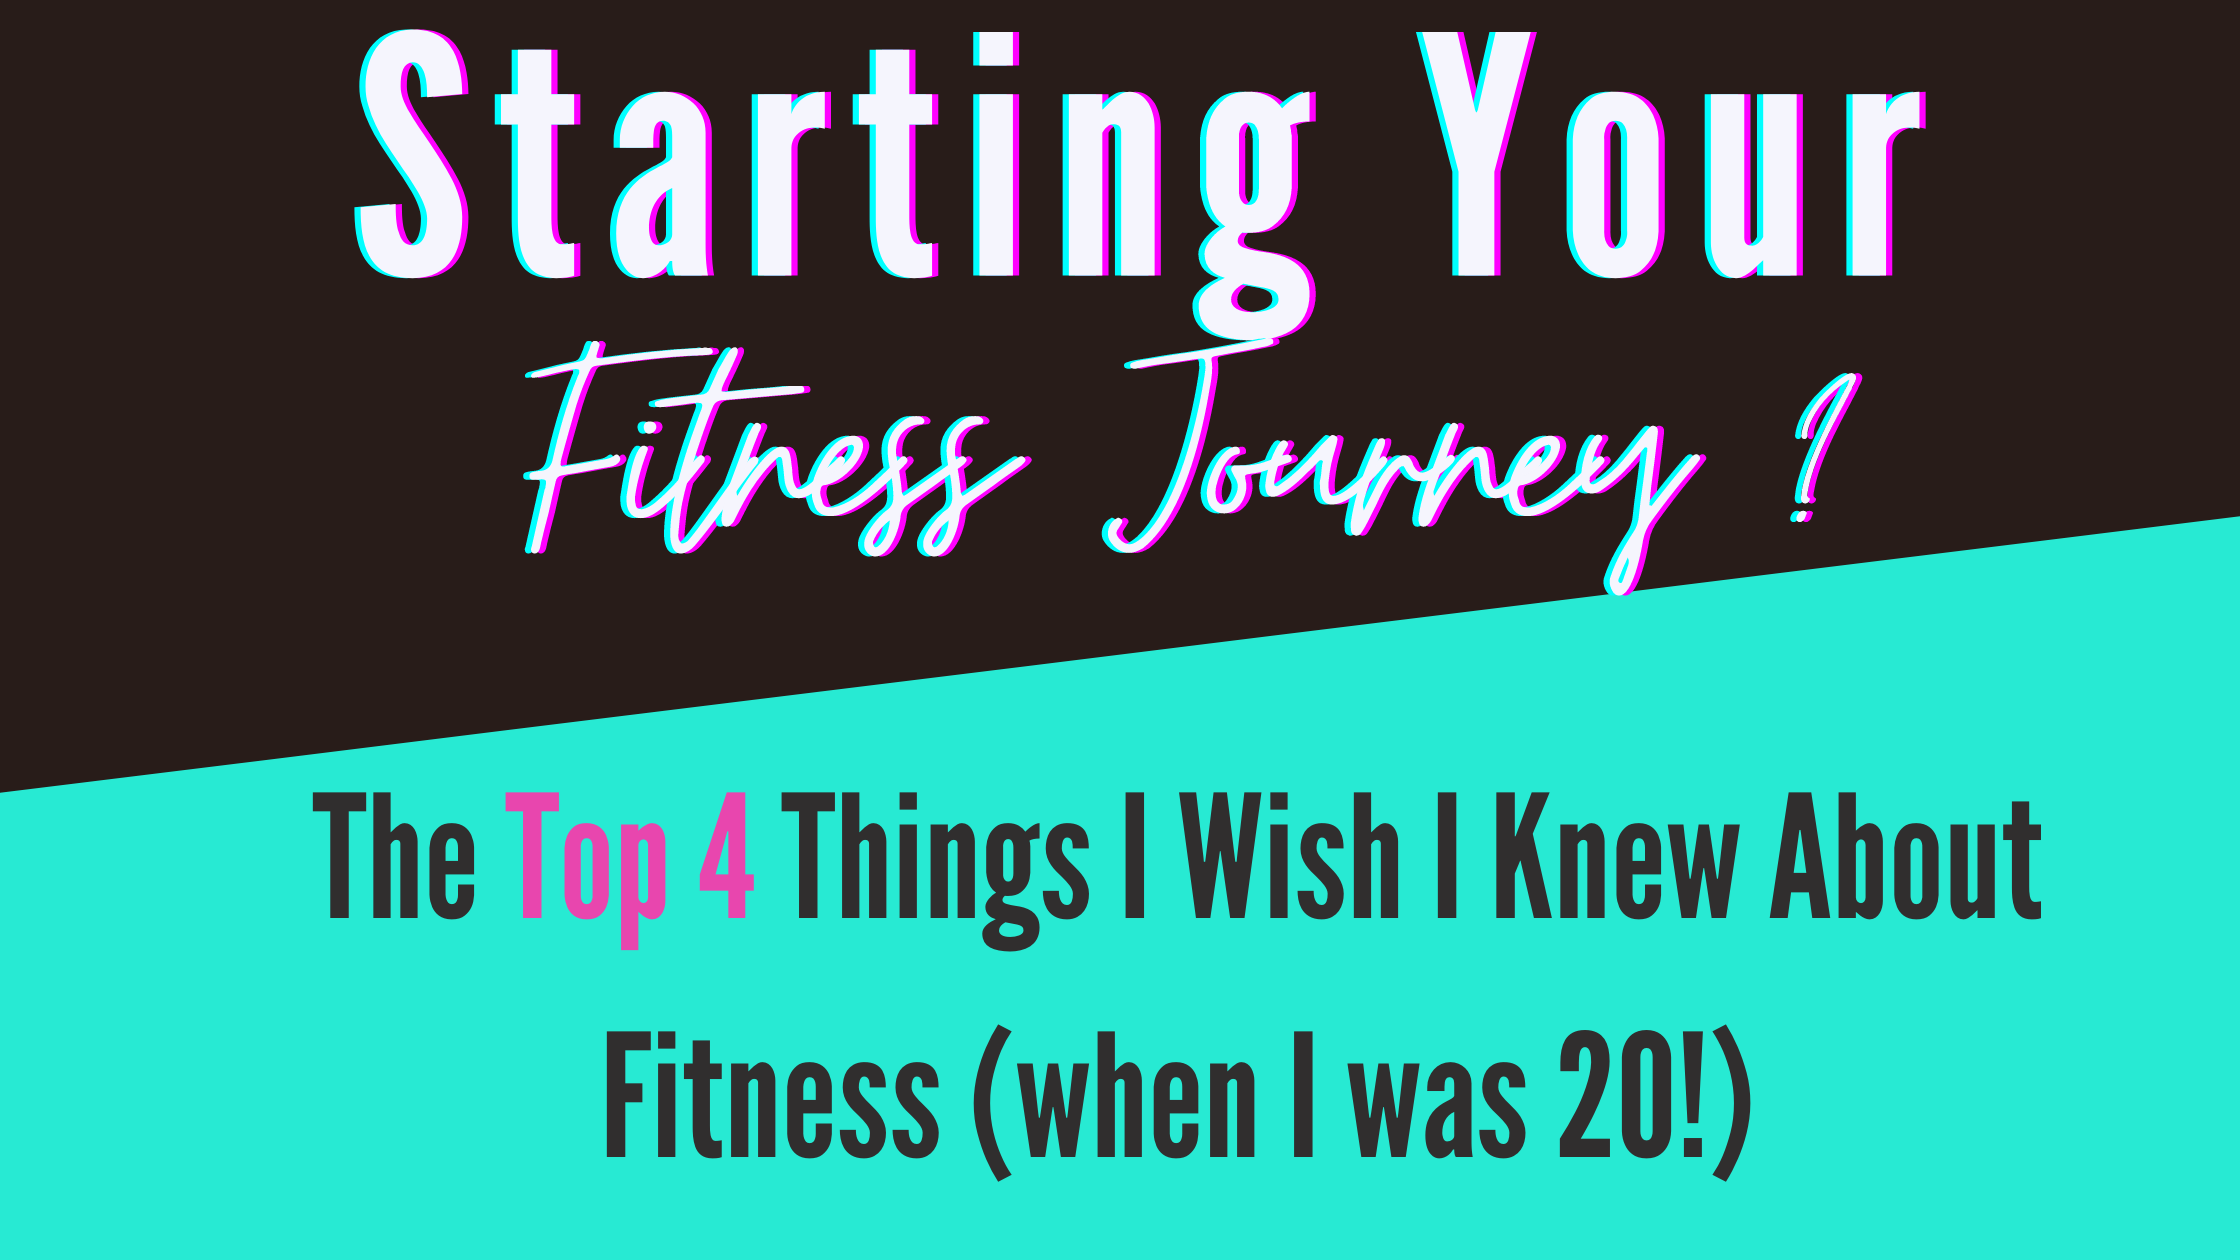 Starting Your Fitness Journey? The Top 4 Things I Wish I Knew About Fitness (when I was 20!)